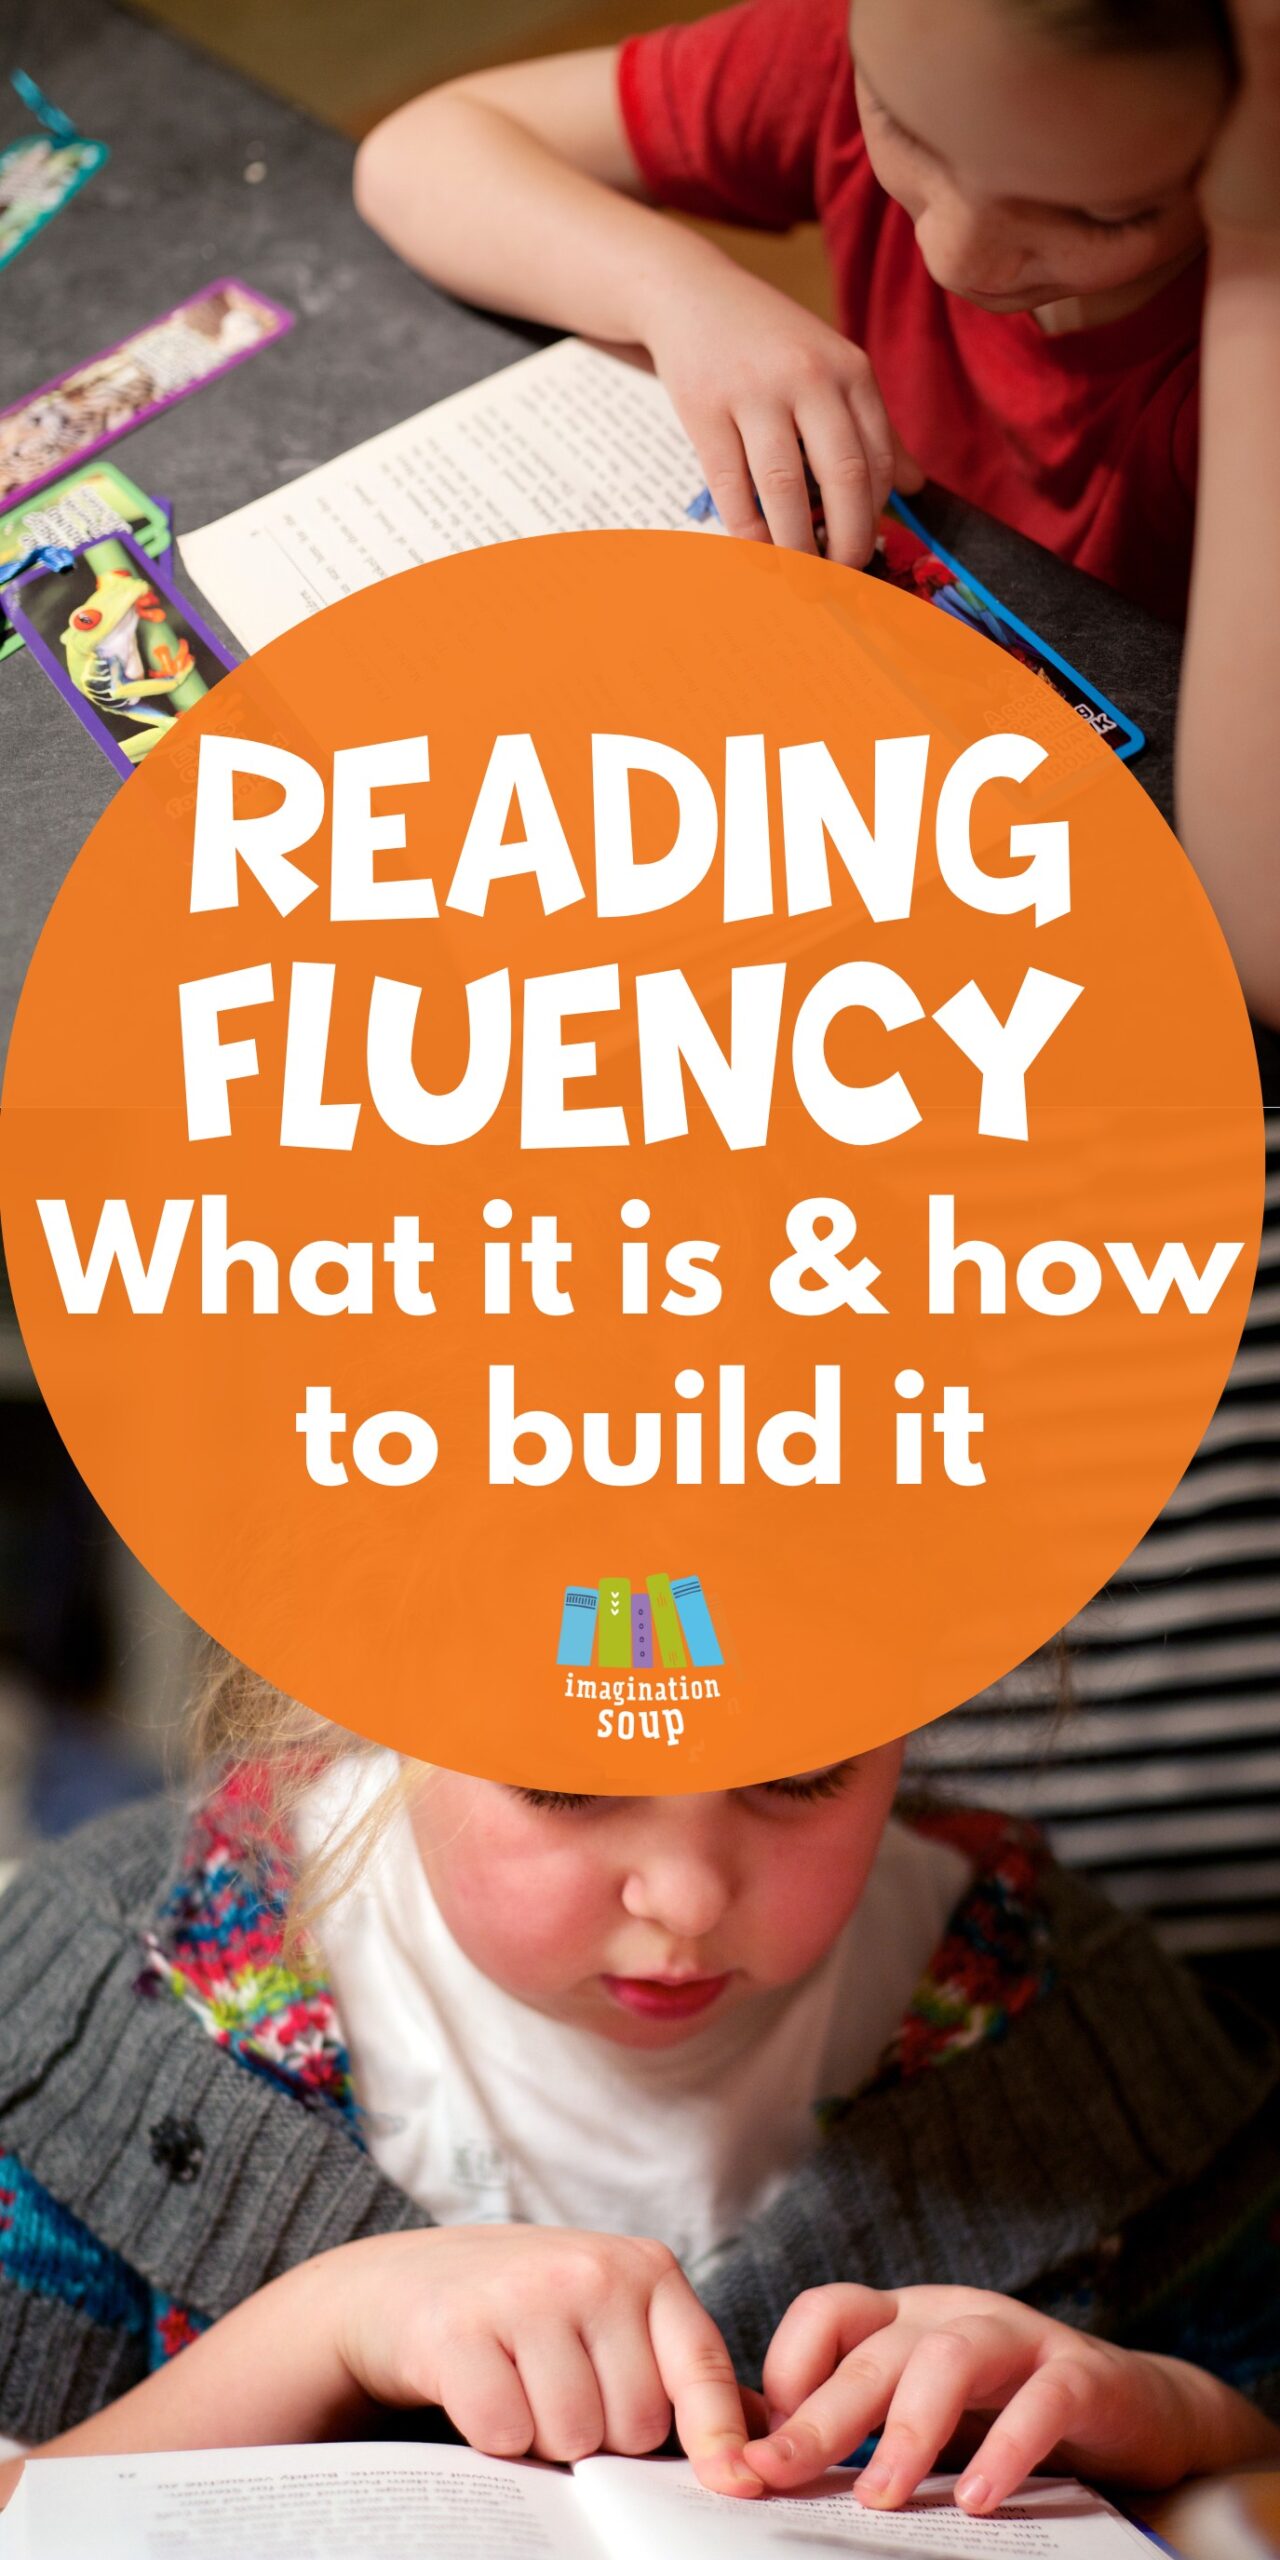 Learn the definition of reading fluency and why it is so important. Then read fluency activities you can do with your kids.